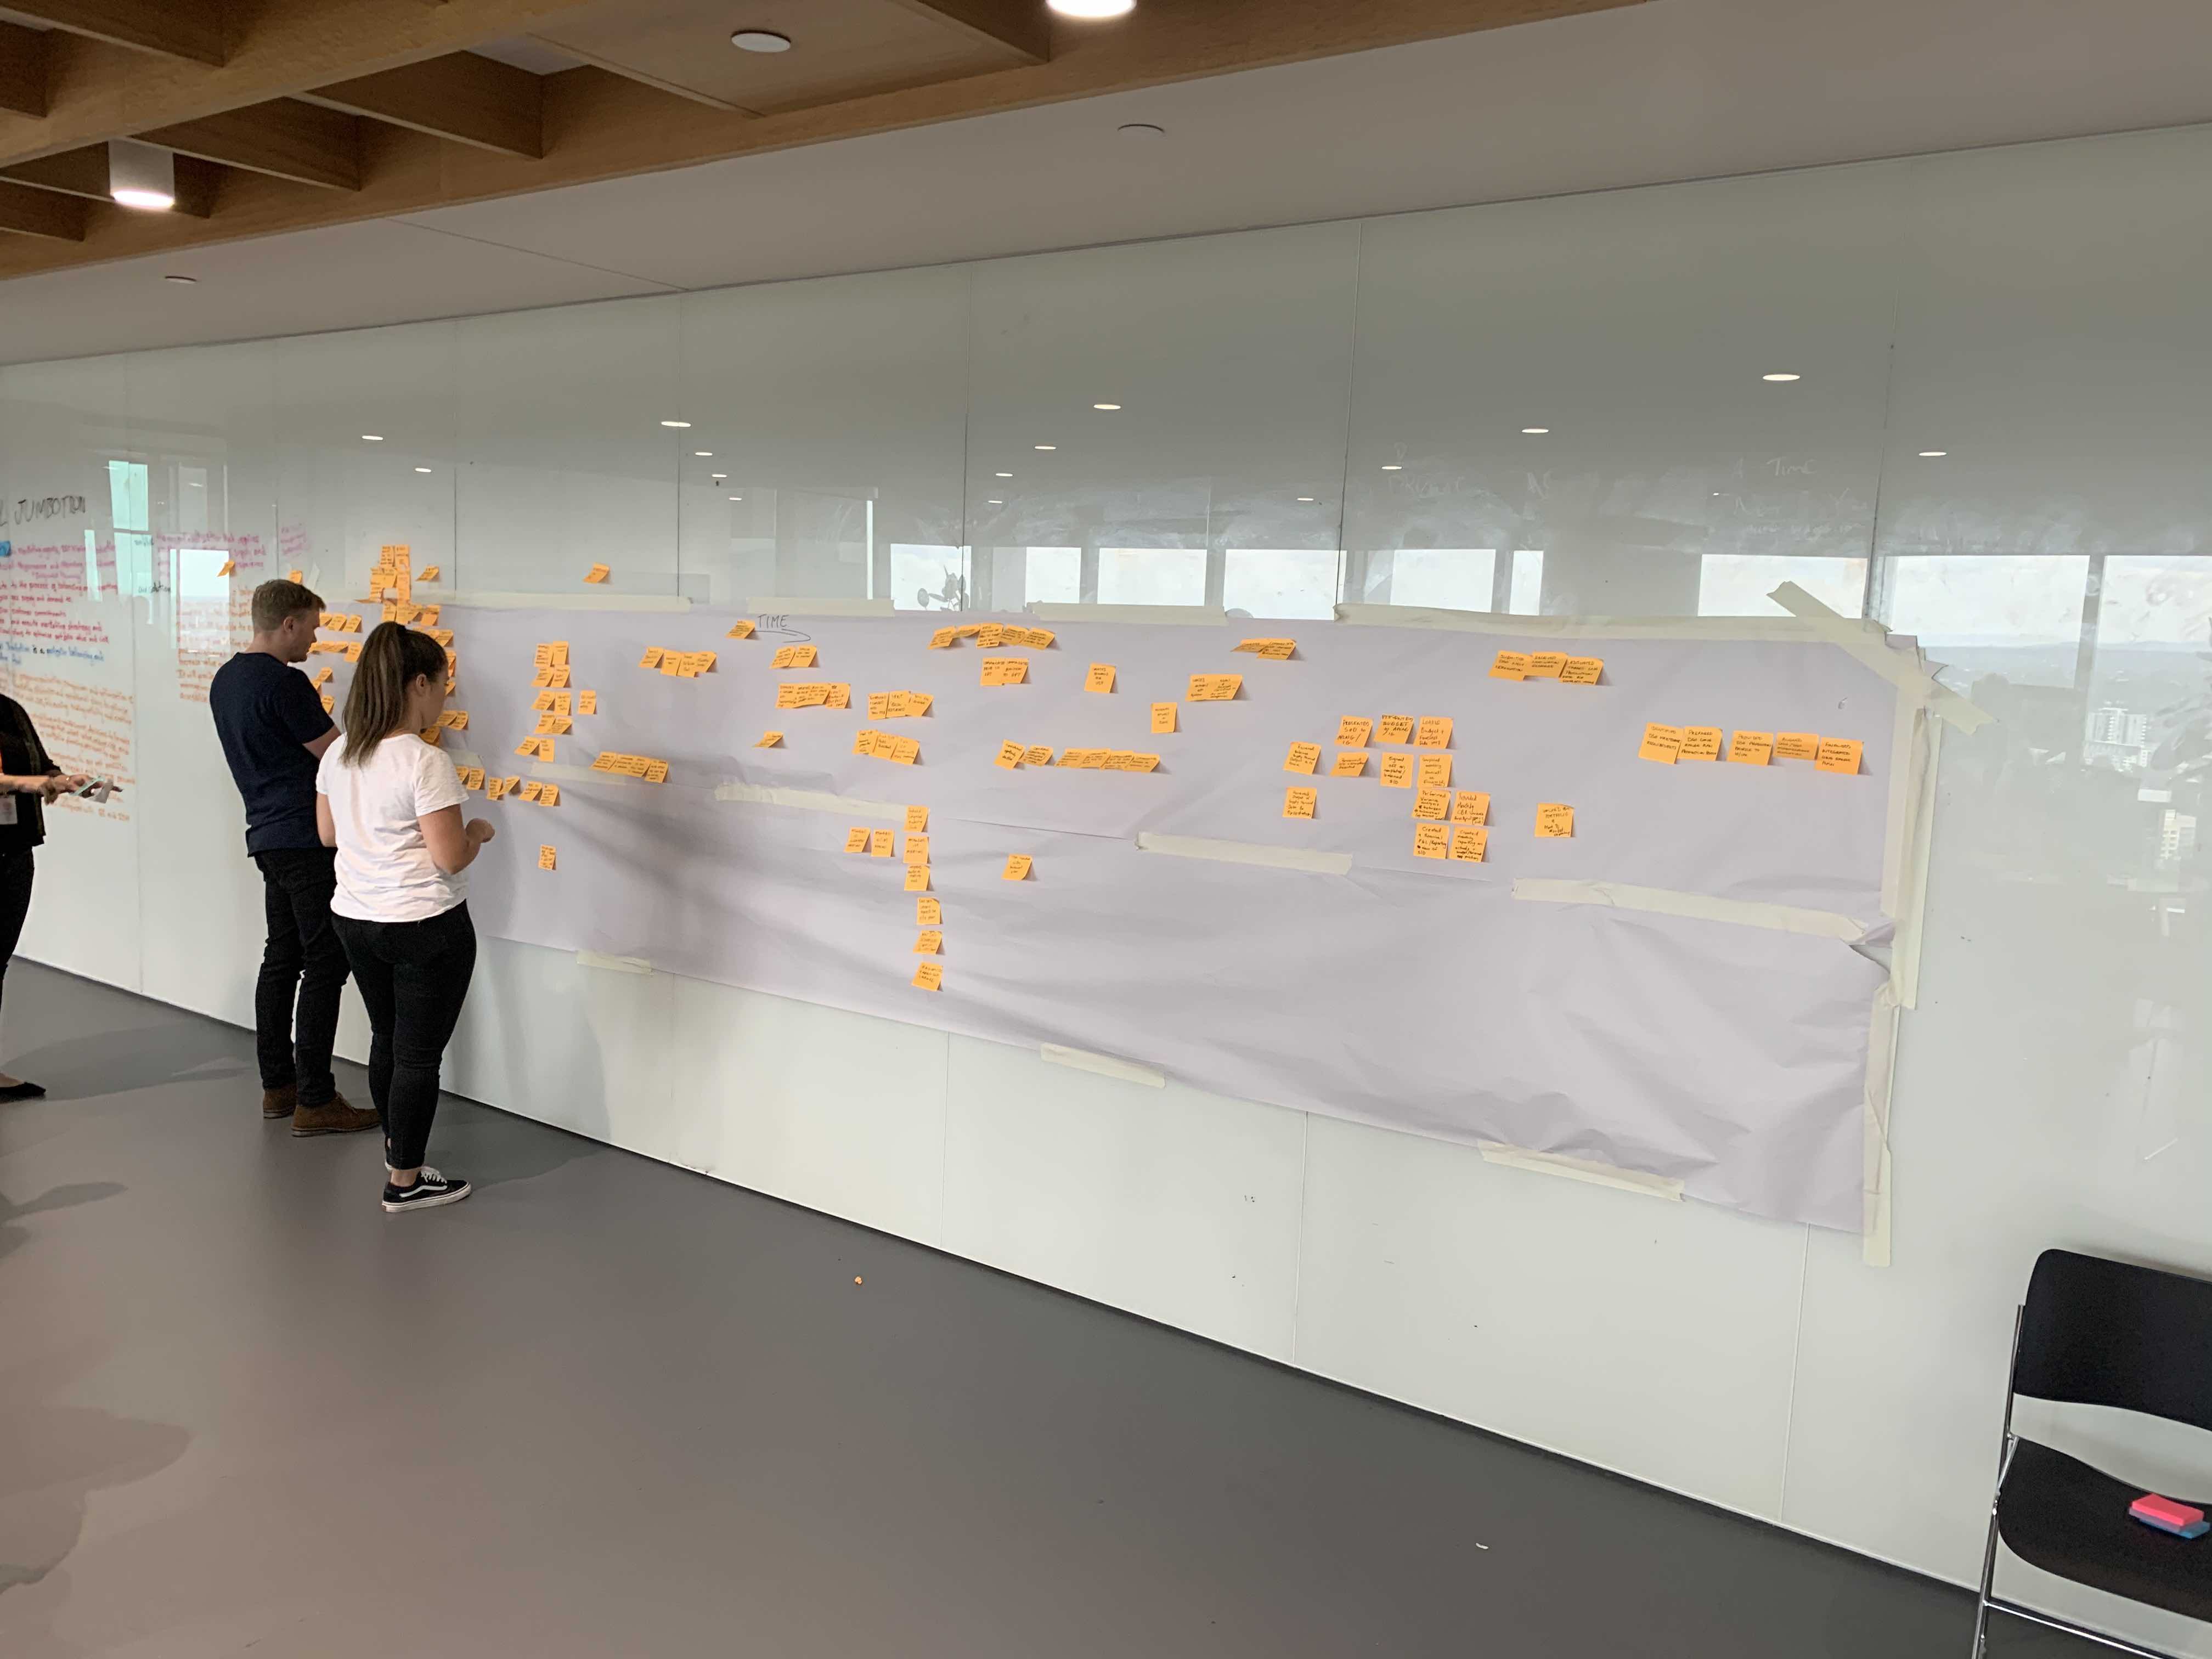 event storming wall in use